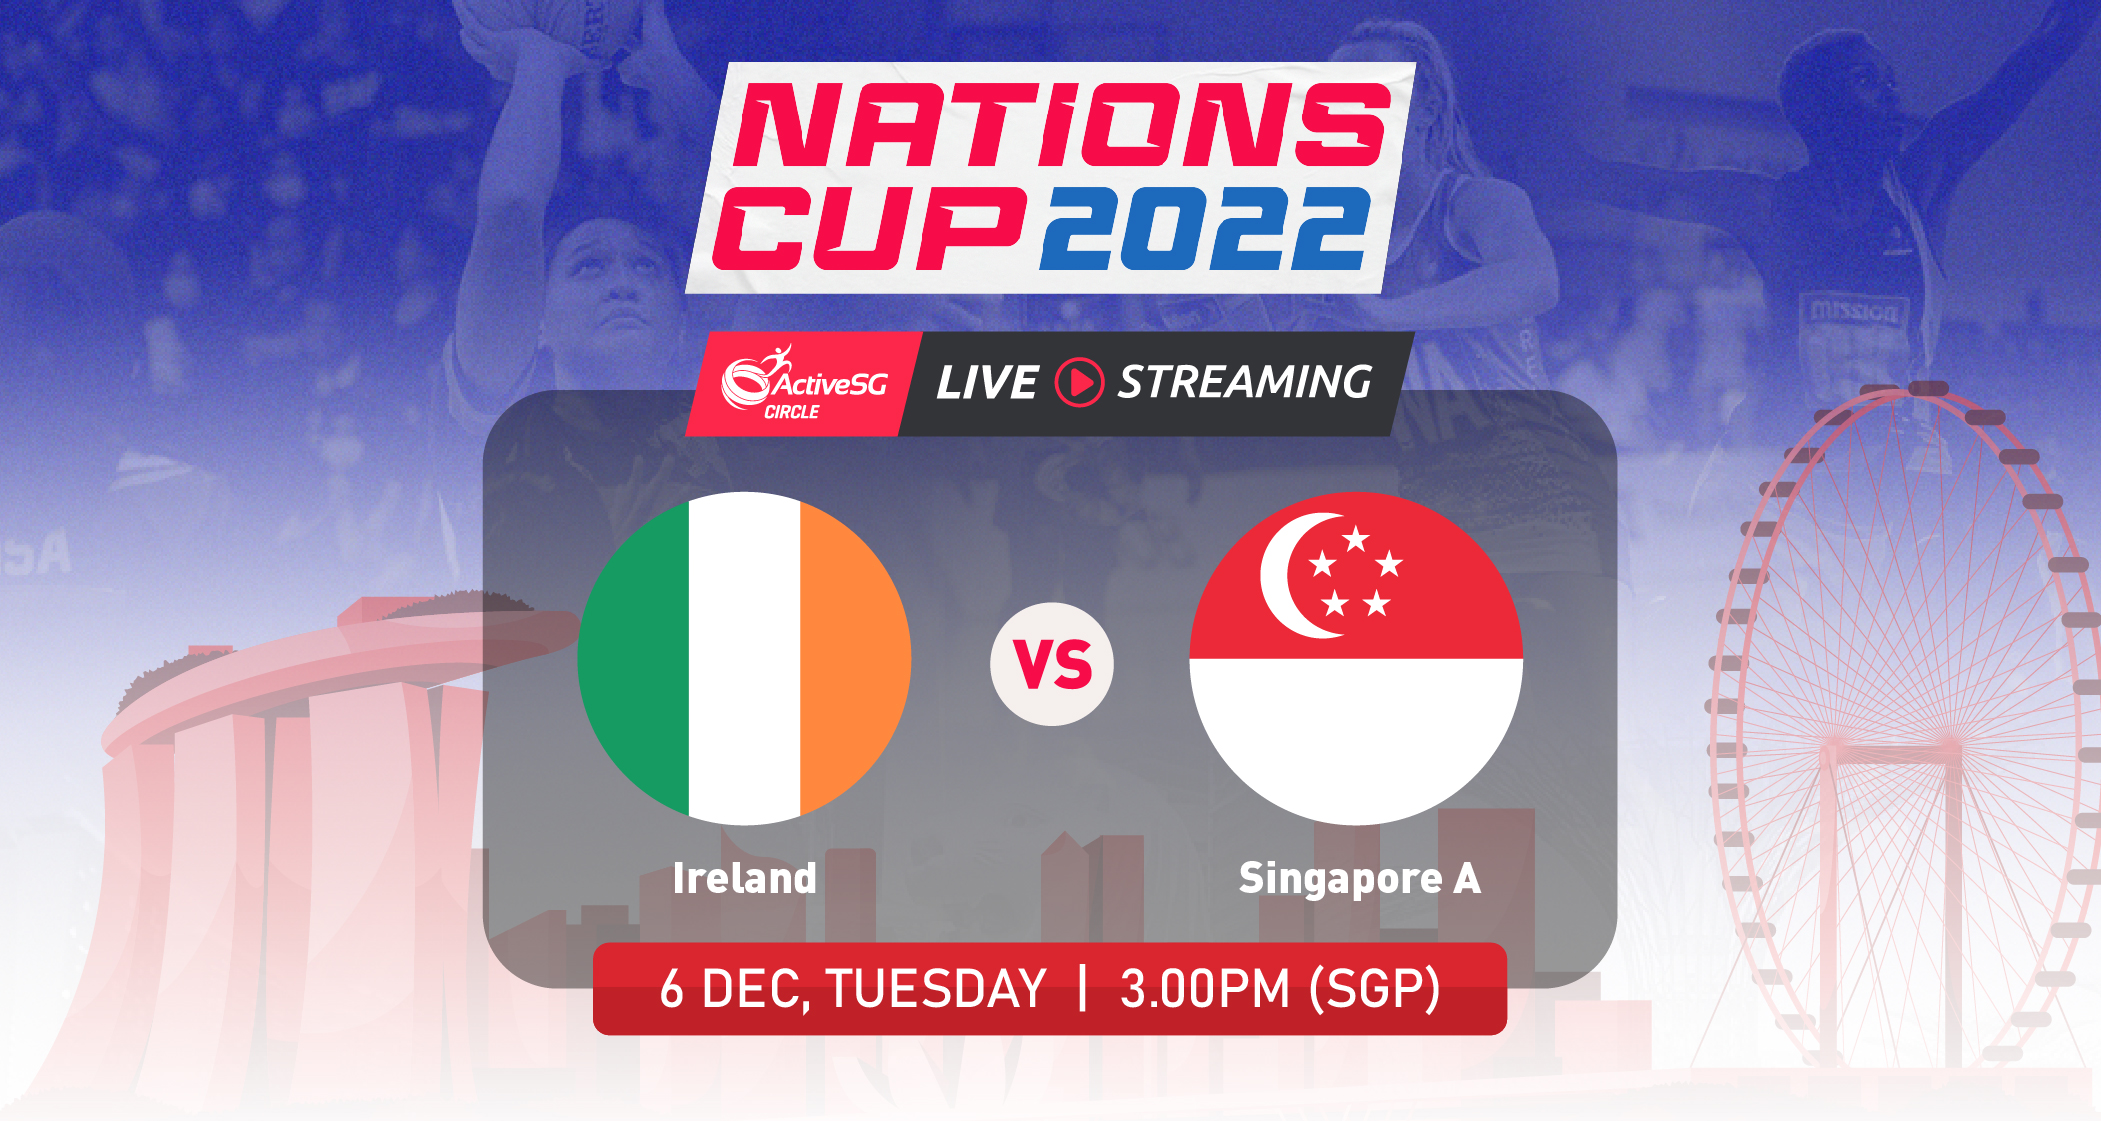 🔴 LIVE: Ireland 🇮🇪 vs 🇸🇬 Singapore A | Nations Cup 2022